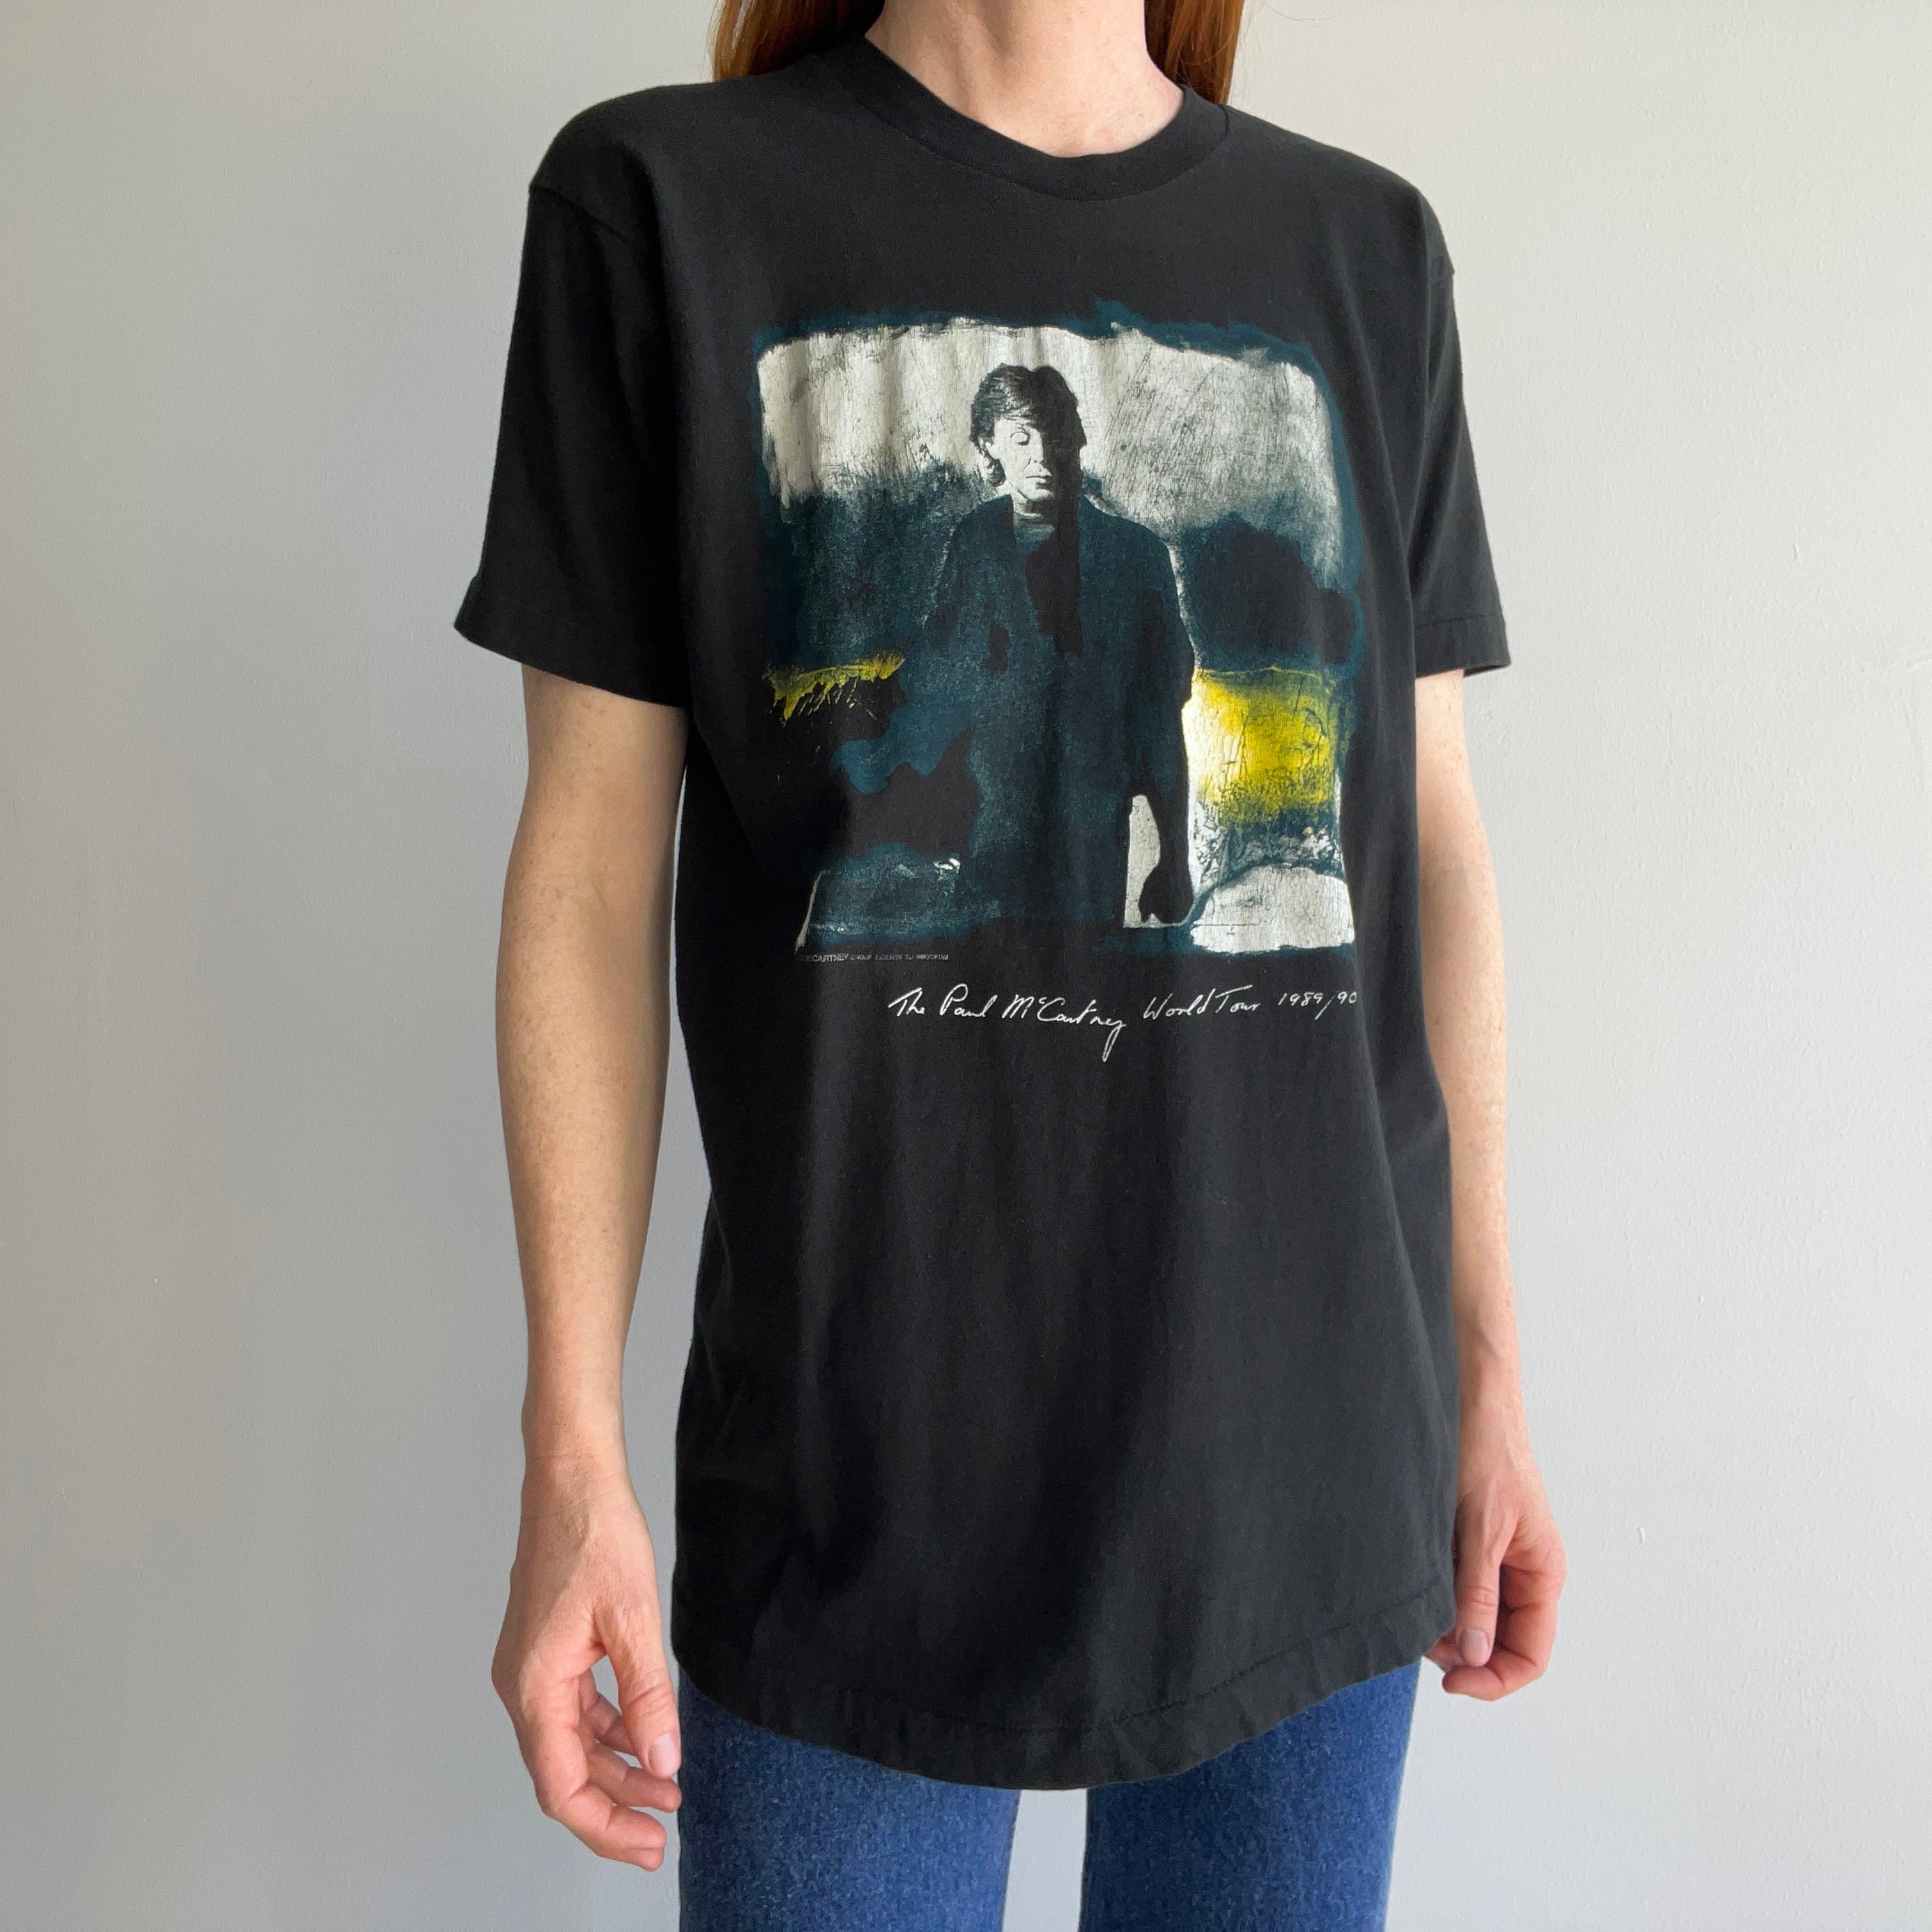 1989/90 Paul McCartney Tour T-Shirt - Front and Back